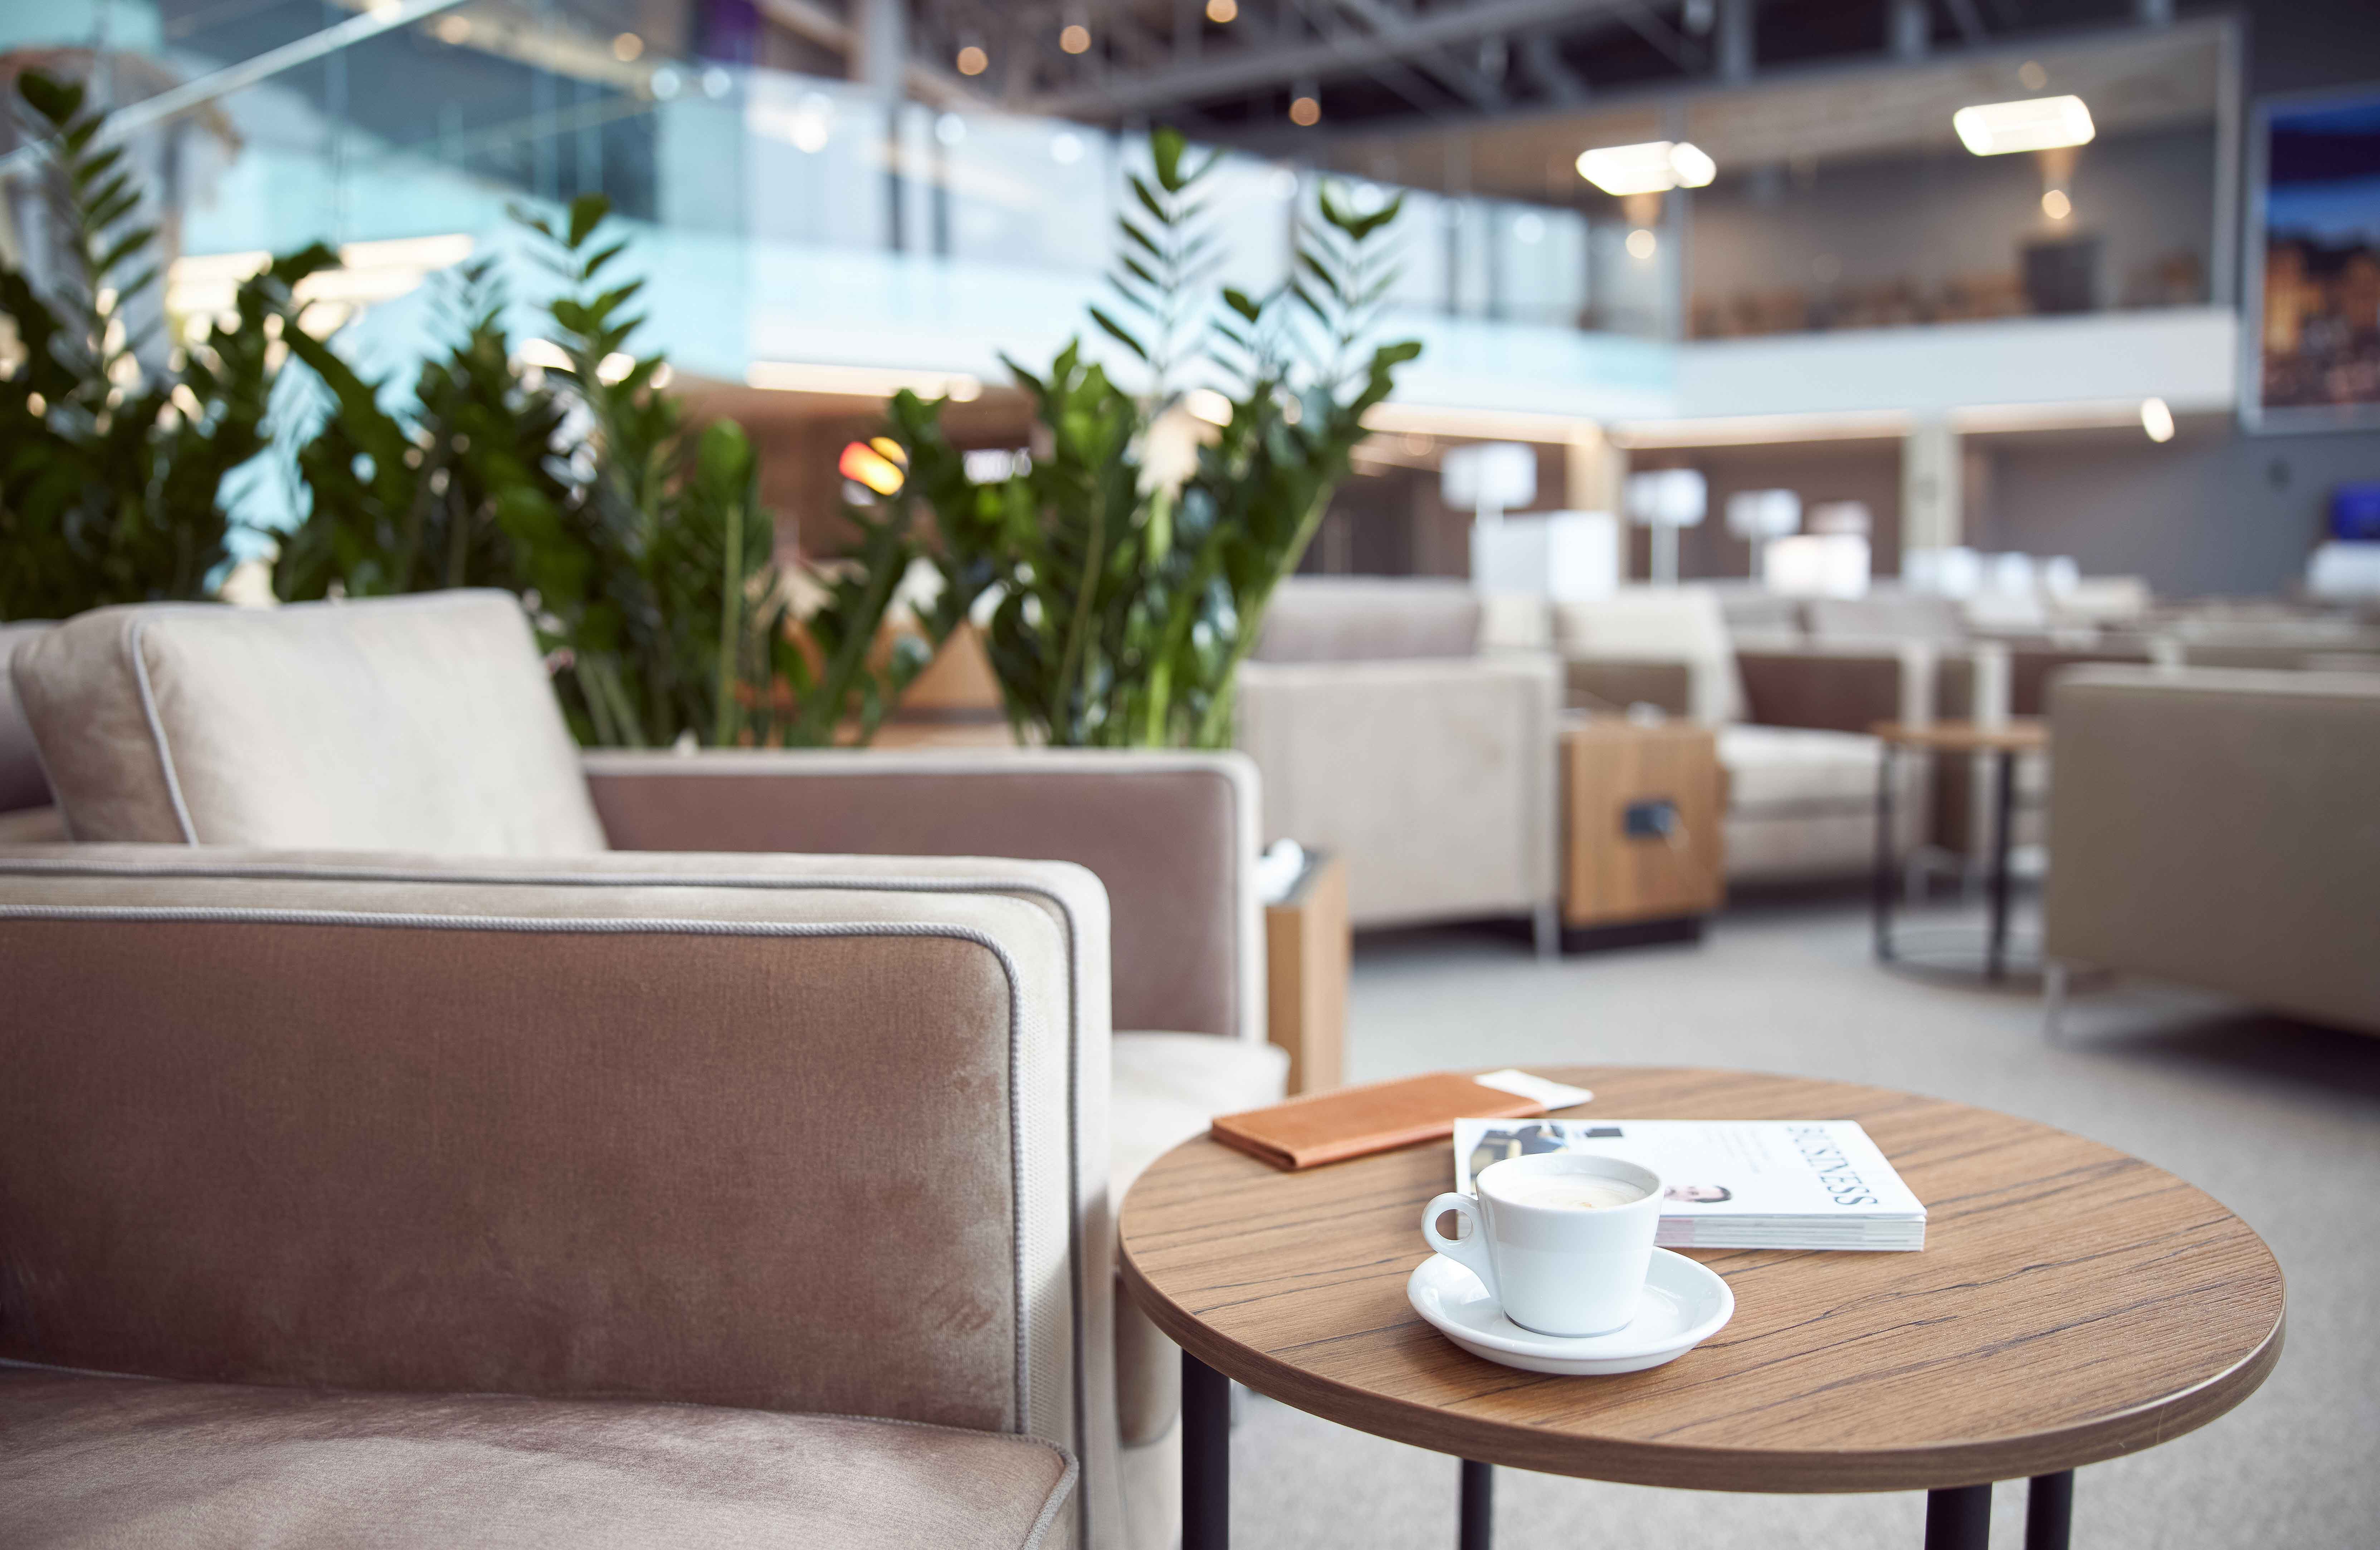 FREE Airport Lounge Access in the UK